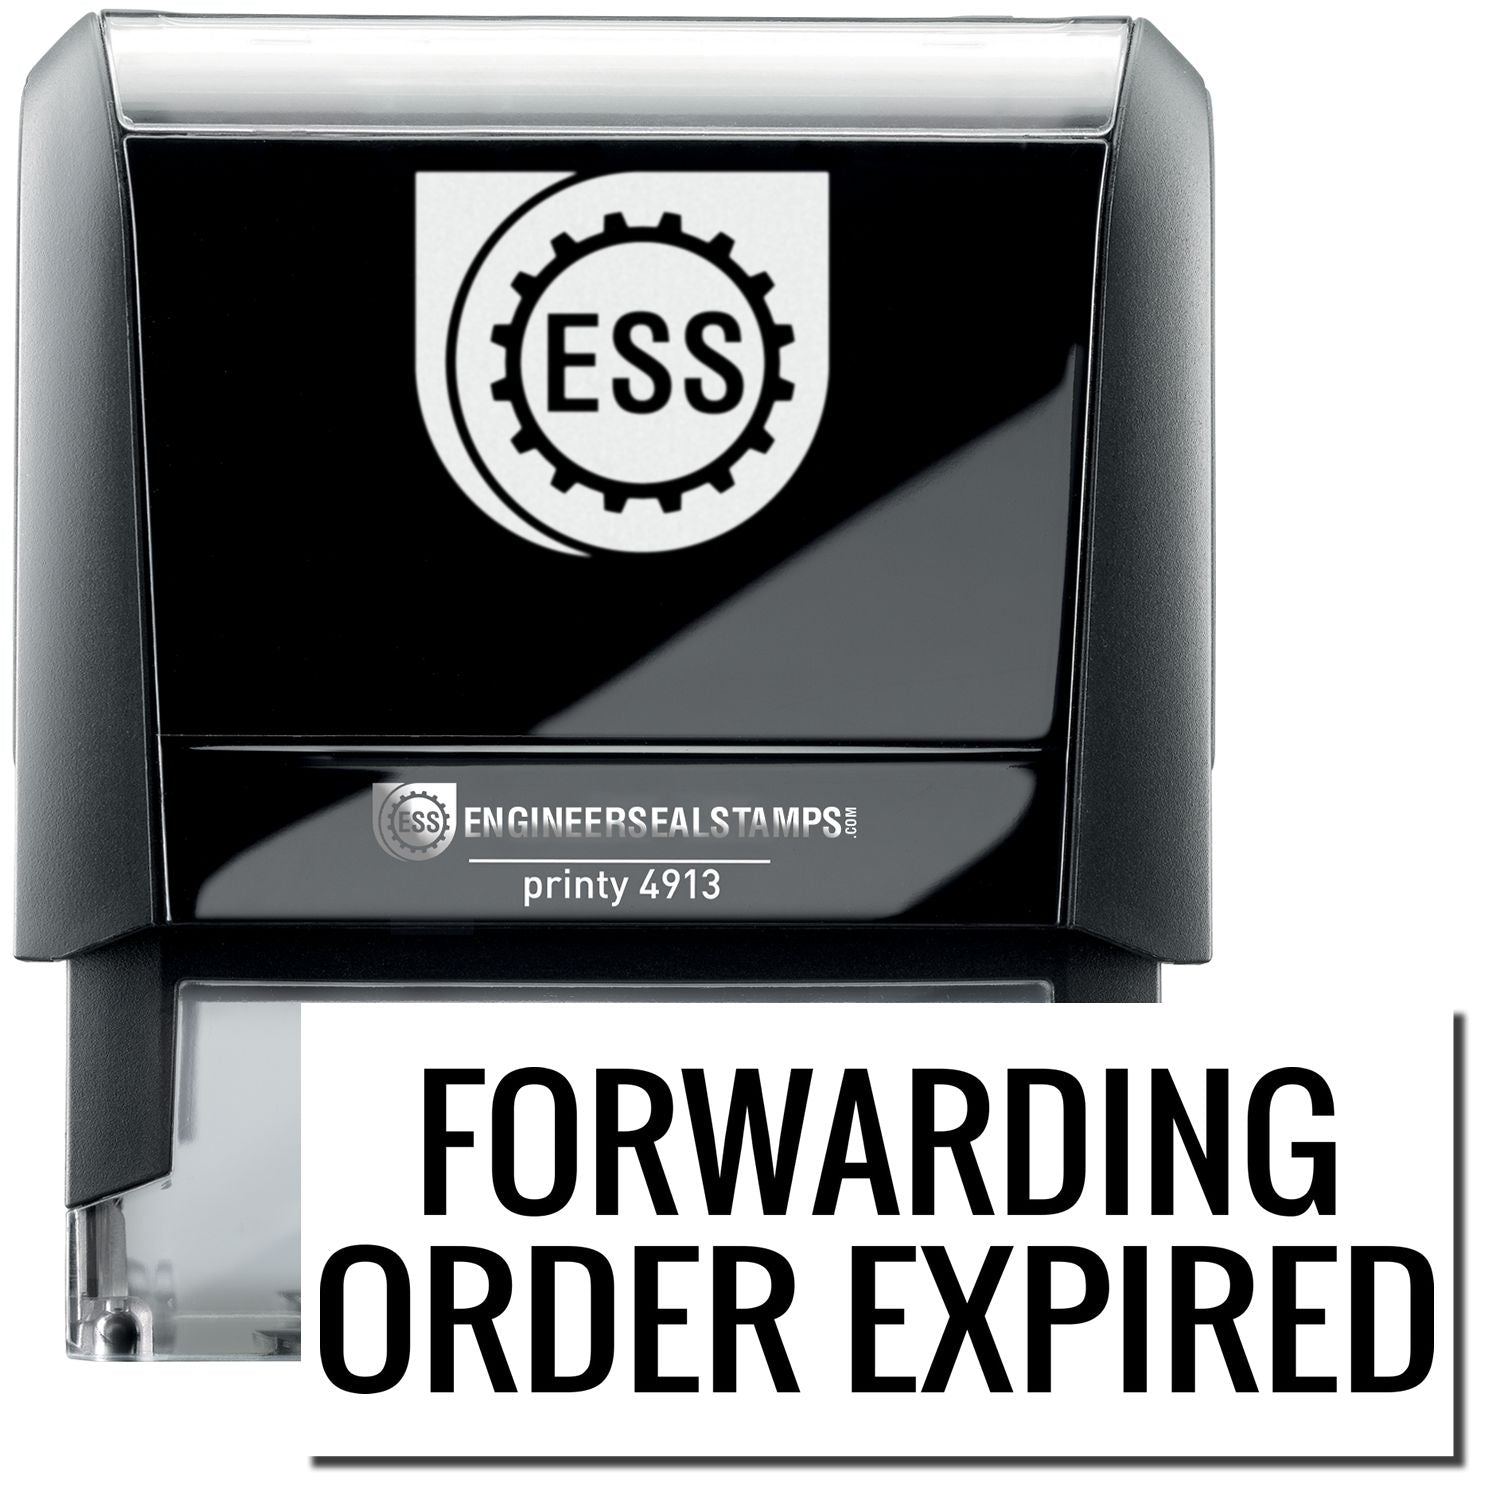 A self-inking stamp with a stamped image showing how the text "FORWARDING ORDER EXPIRED" in a large font is displayed by it after stamping.